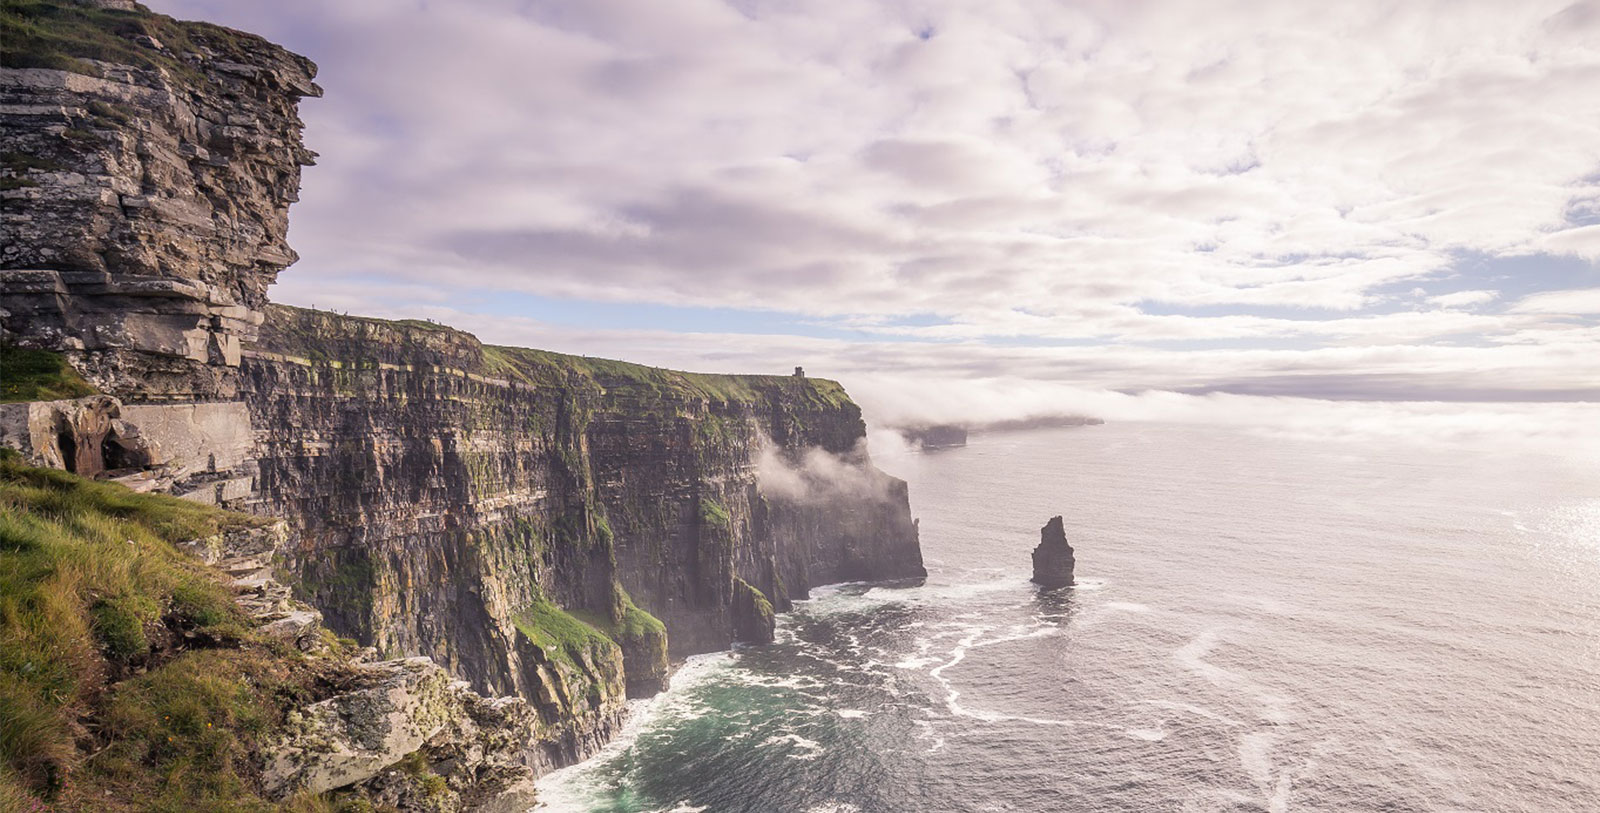 Explore the nearby Cliffs of Moher, a UNESCO World Heritage Site.